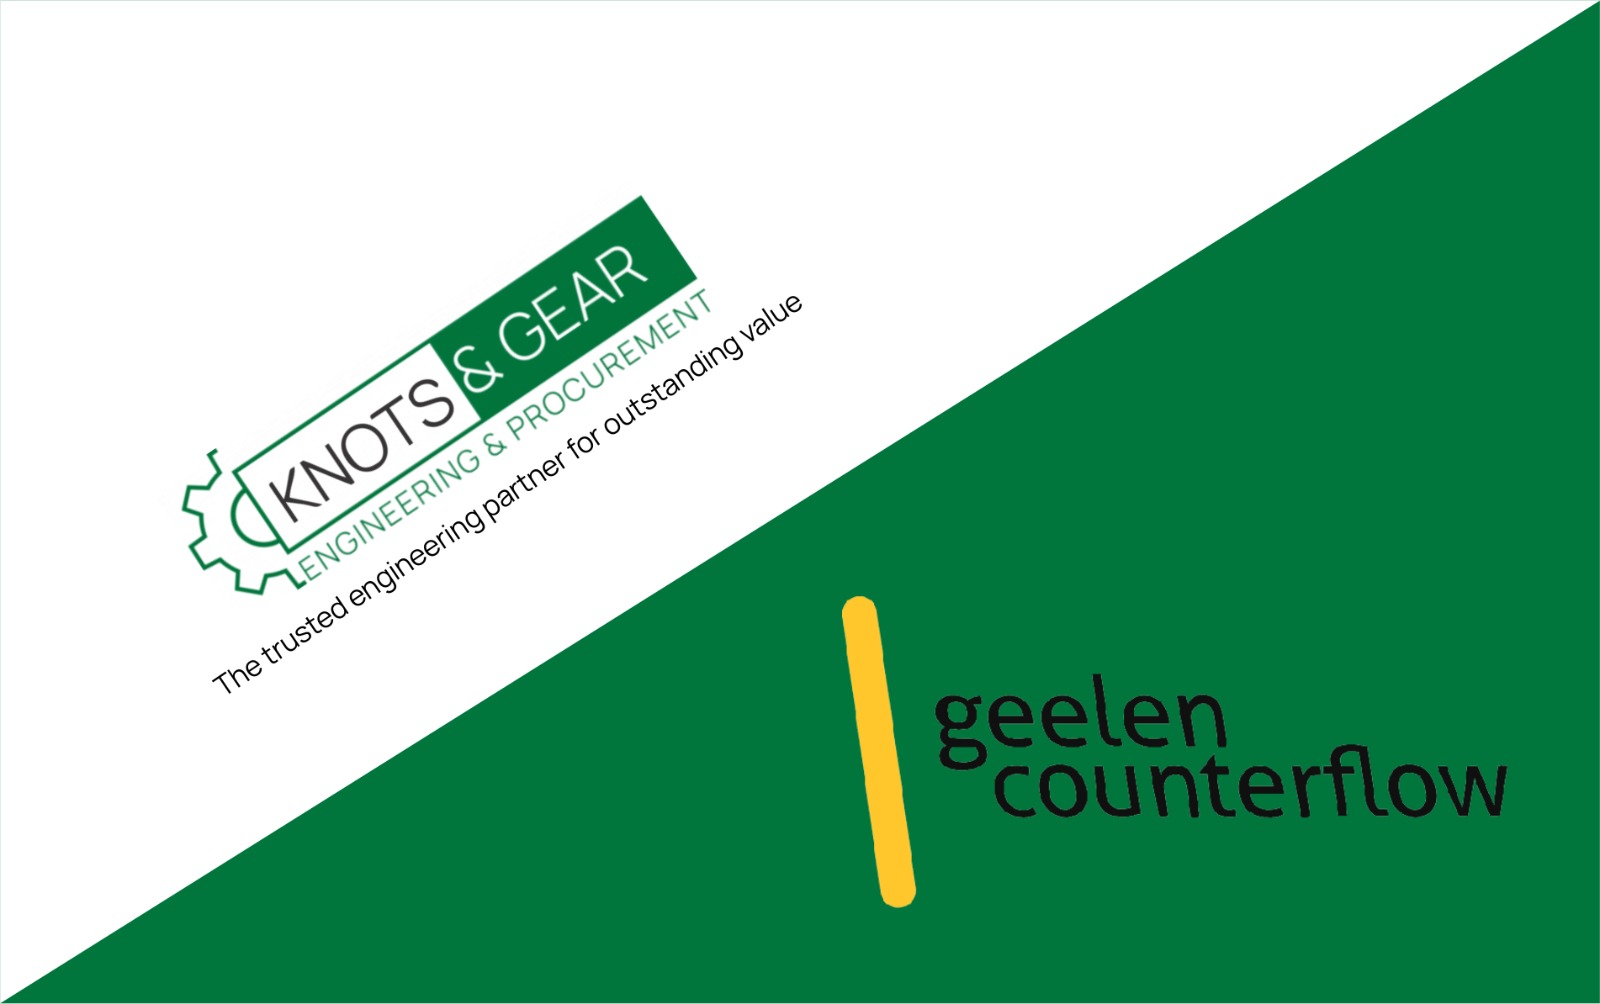 Knots and Gear partners with Geelen Counterflow